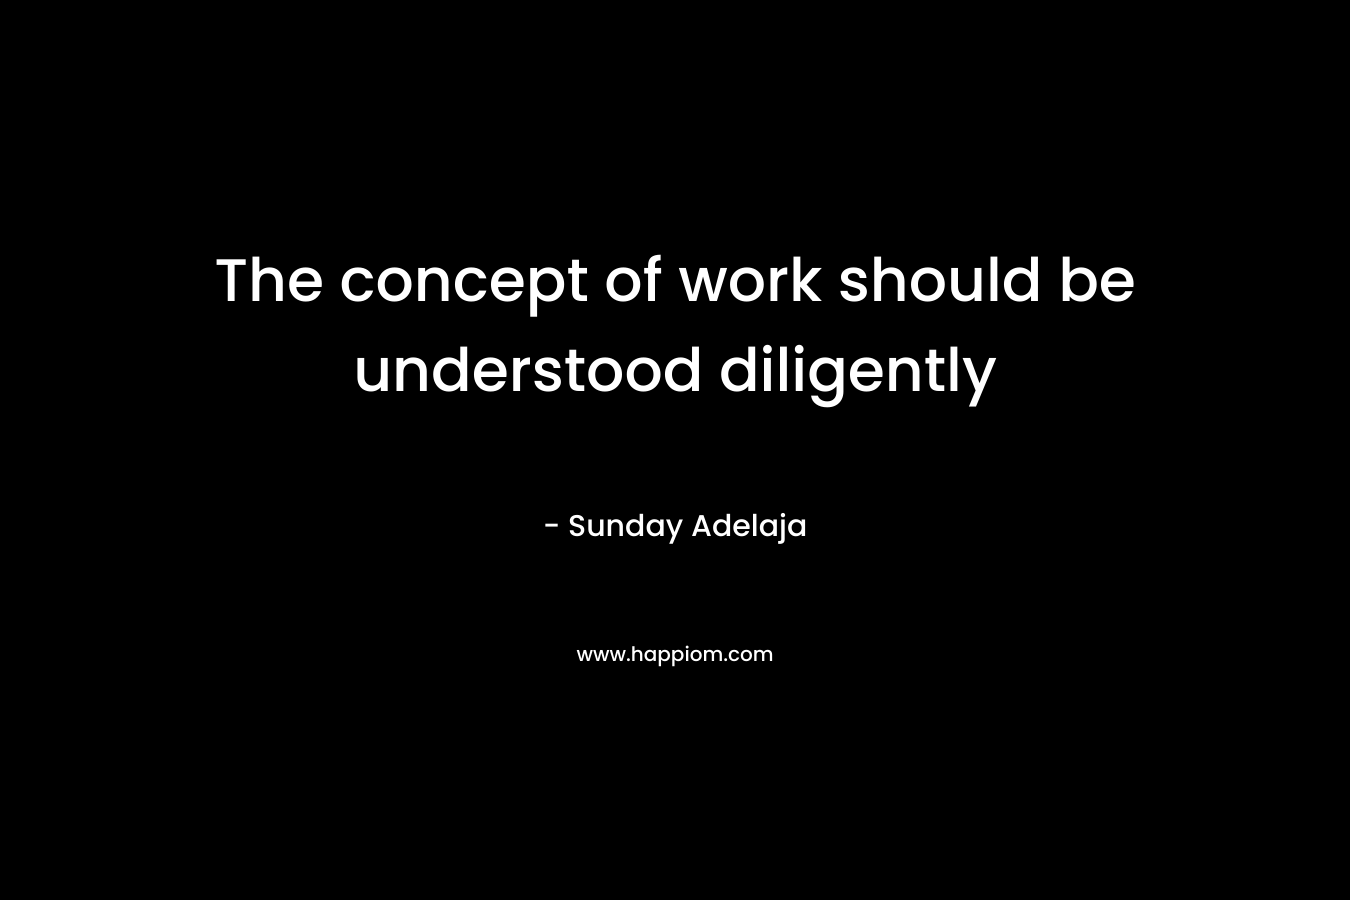 The concept of work should be understood diligently